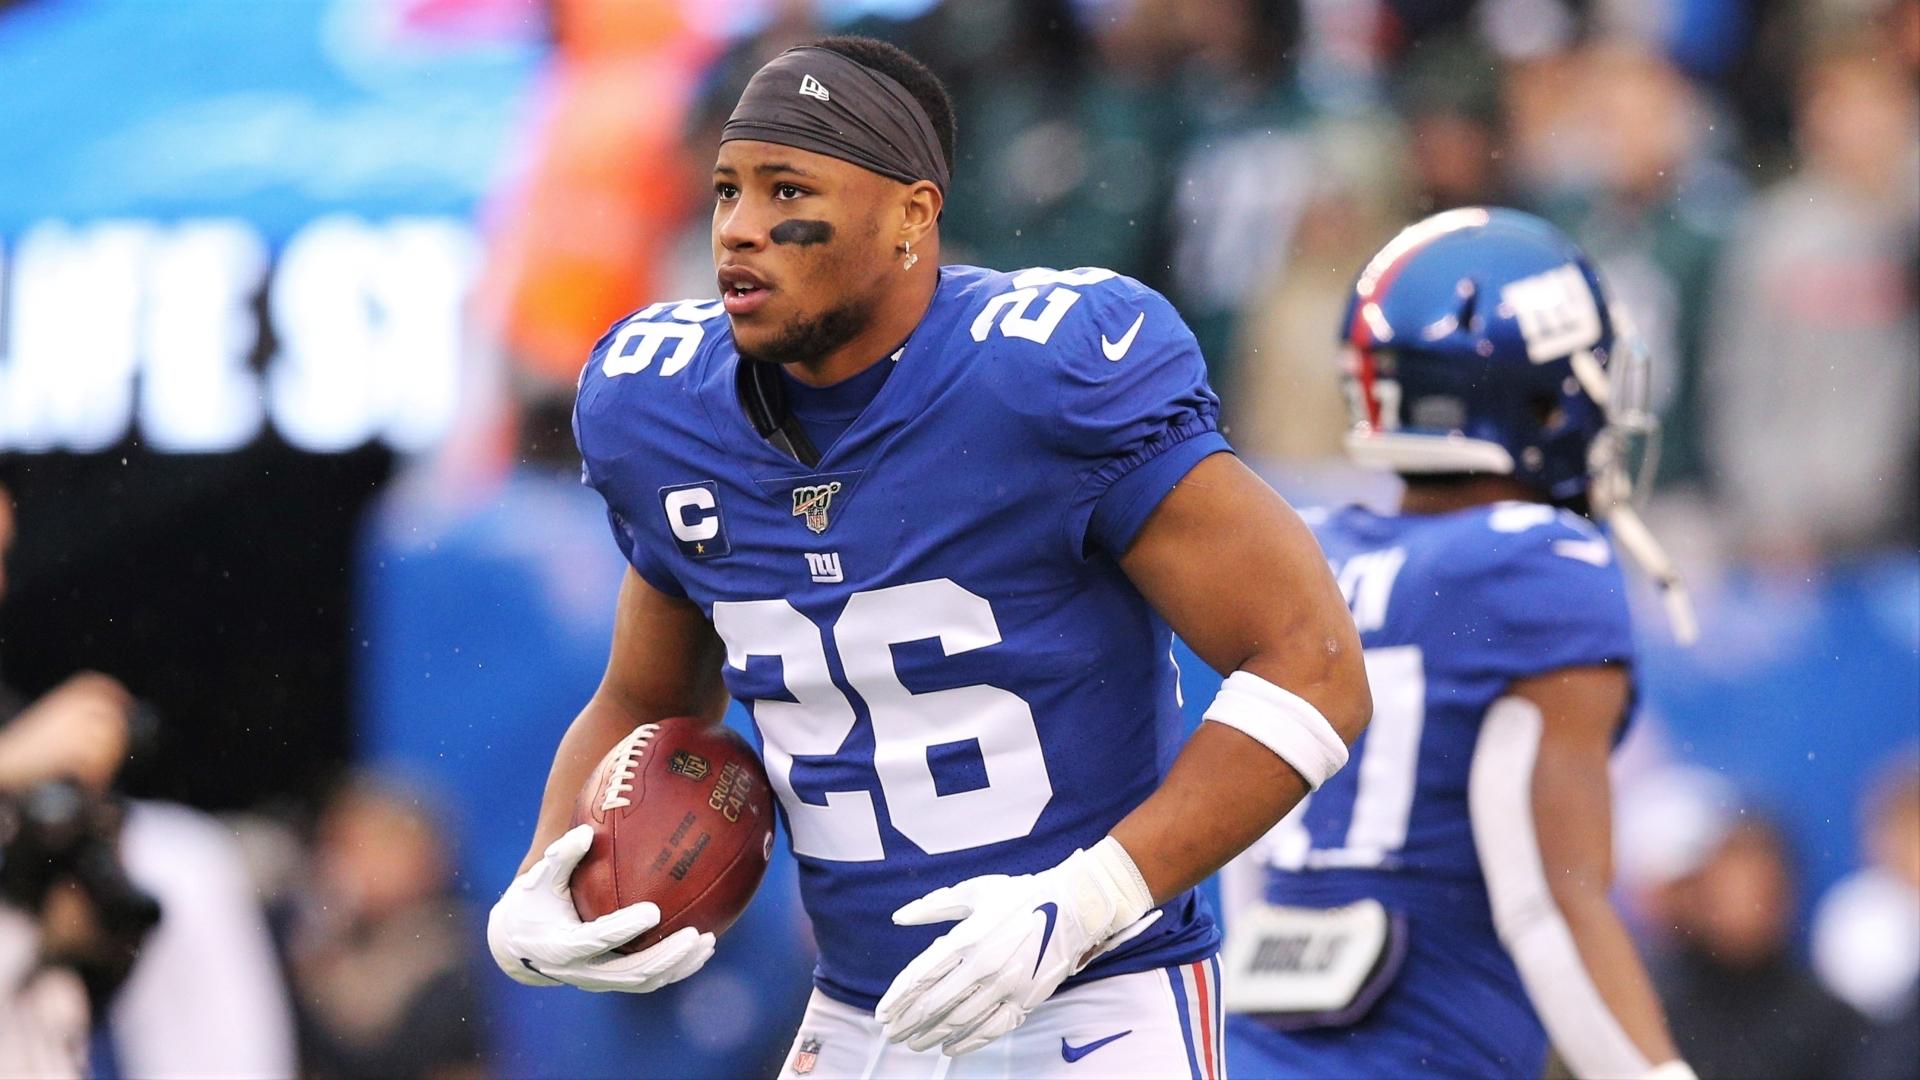 Dec 29, 2019; East Rutherford, New Jersey, USA; New York Giants running back Saquon Barkley (26) warms up before a game against the Philadelphia Eagles at MetLife Stadium. / Brad Penner-USA TODAY Sports